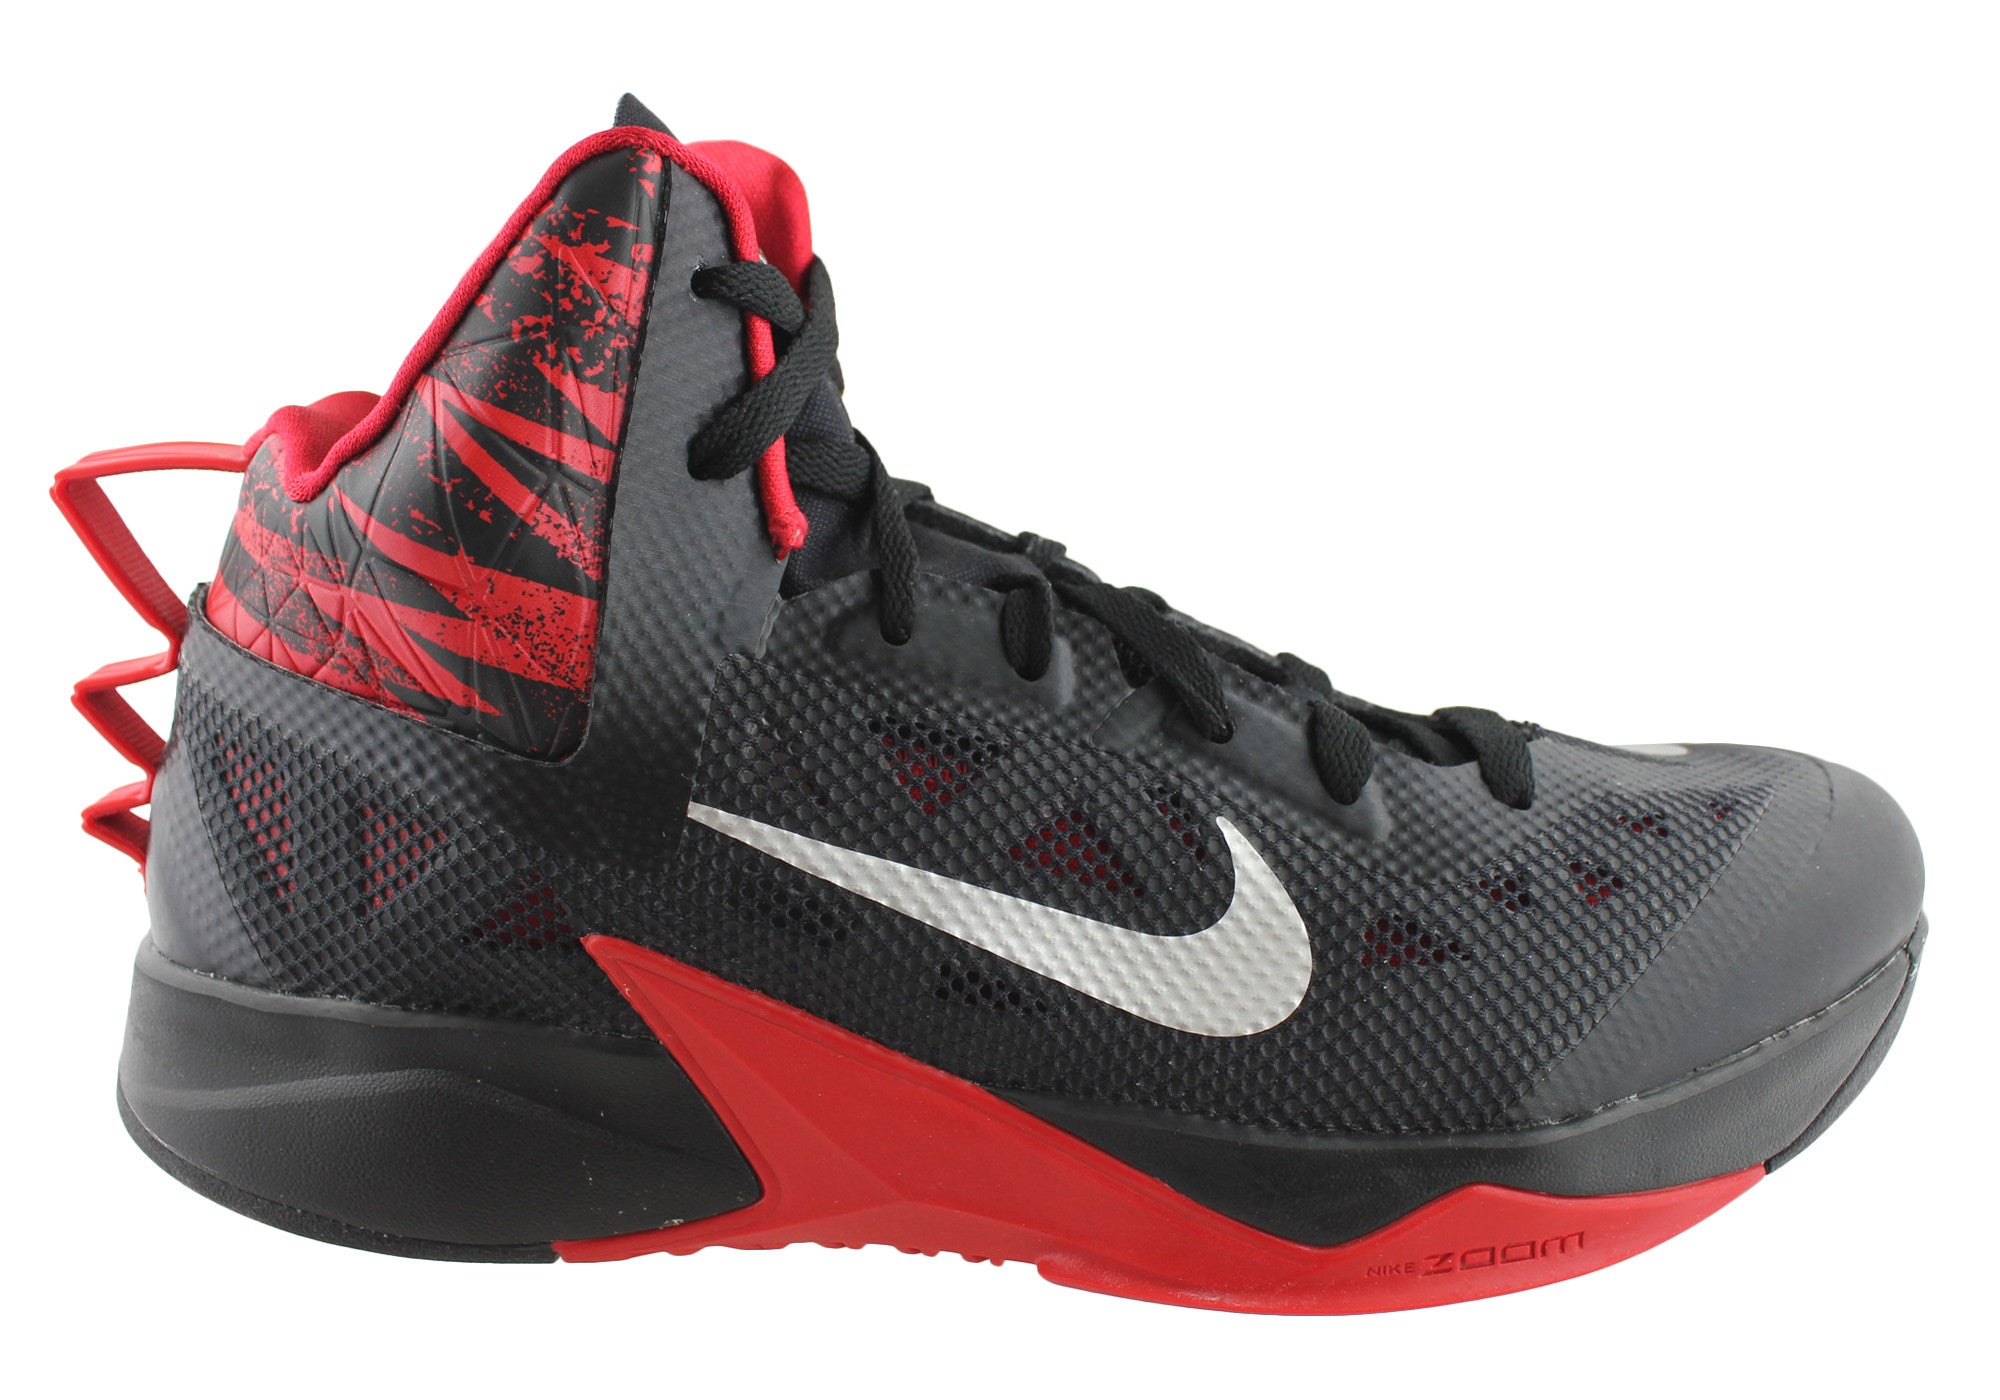 basketball shoes mens high top